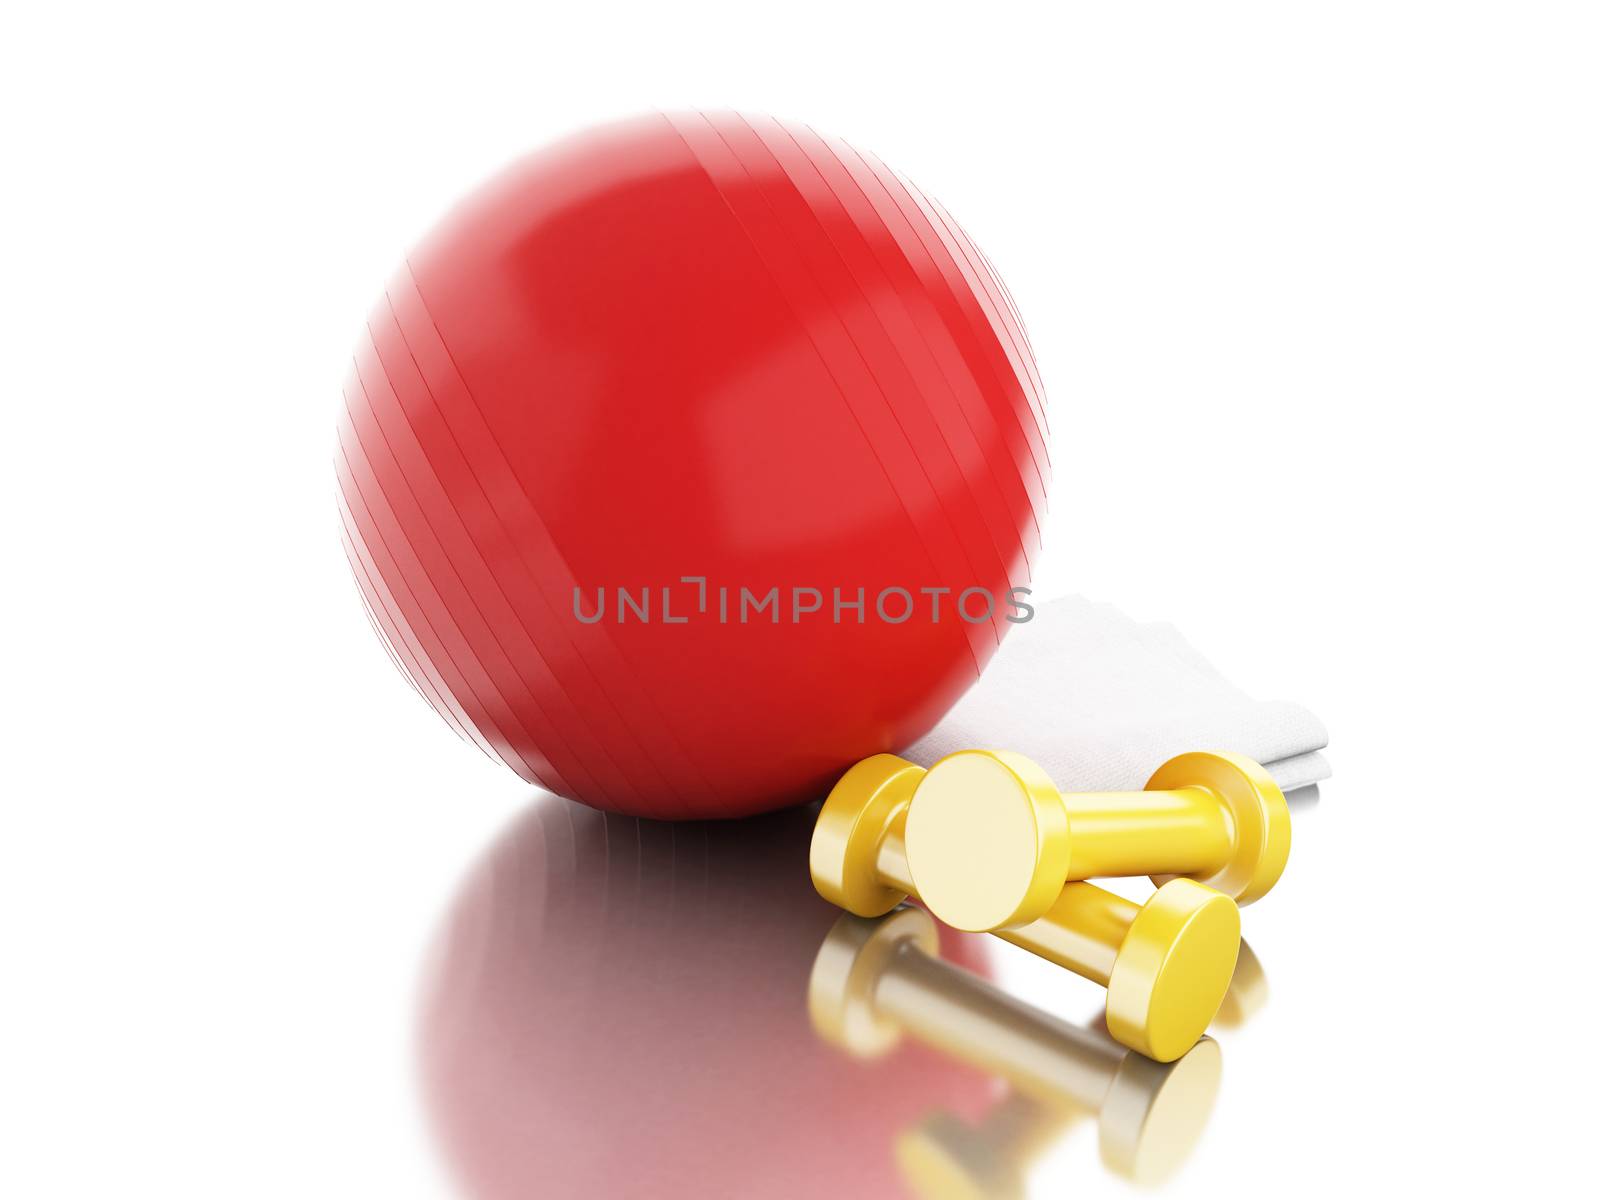 3d illustration. Fitness ball, weights and towel. Fitness equipment. Healthy life concept.